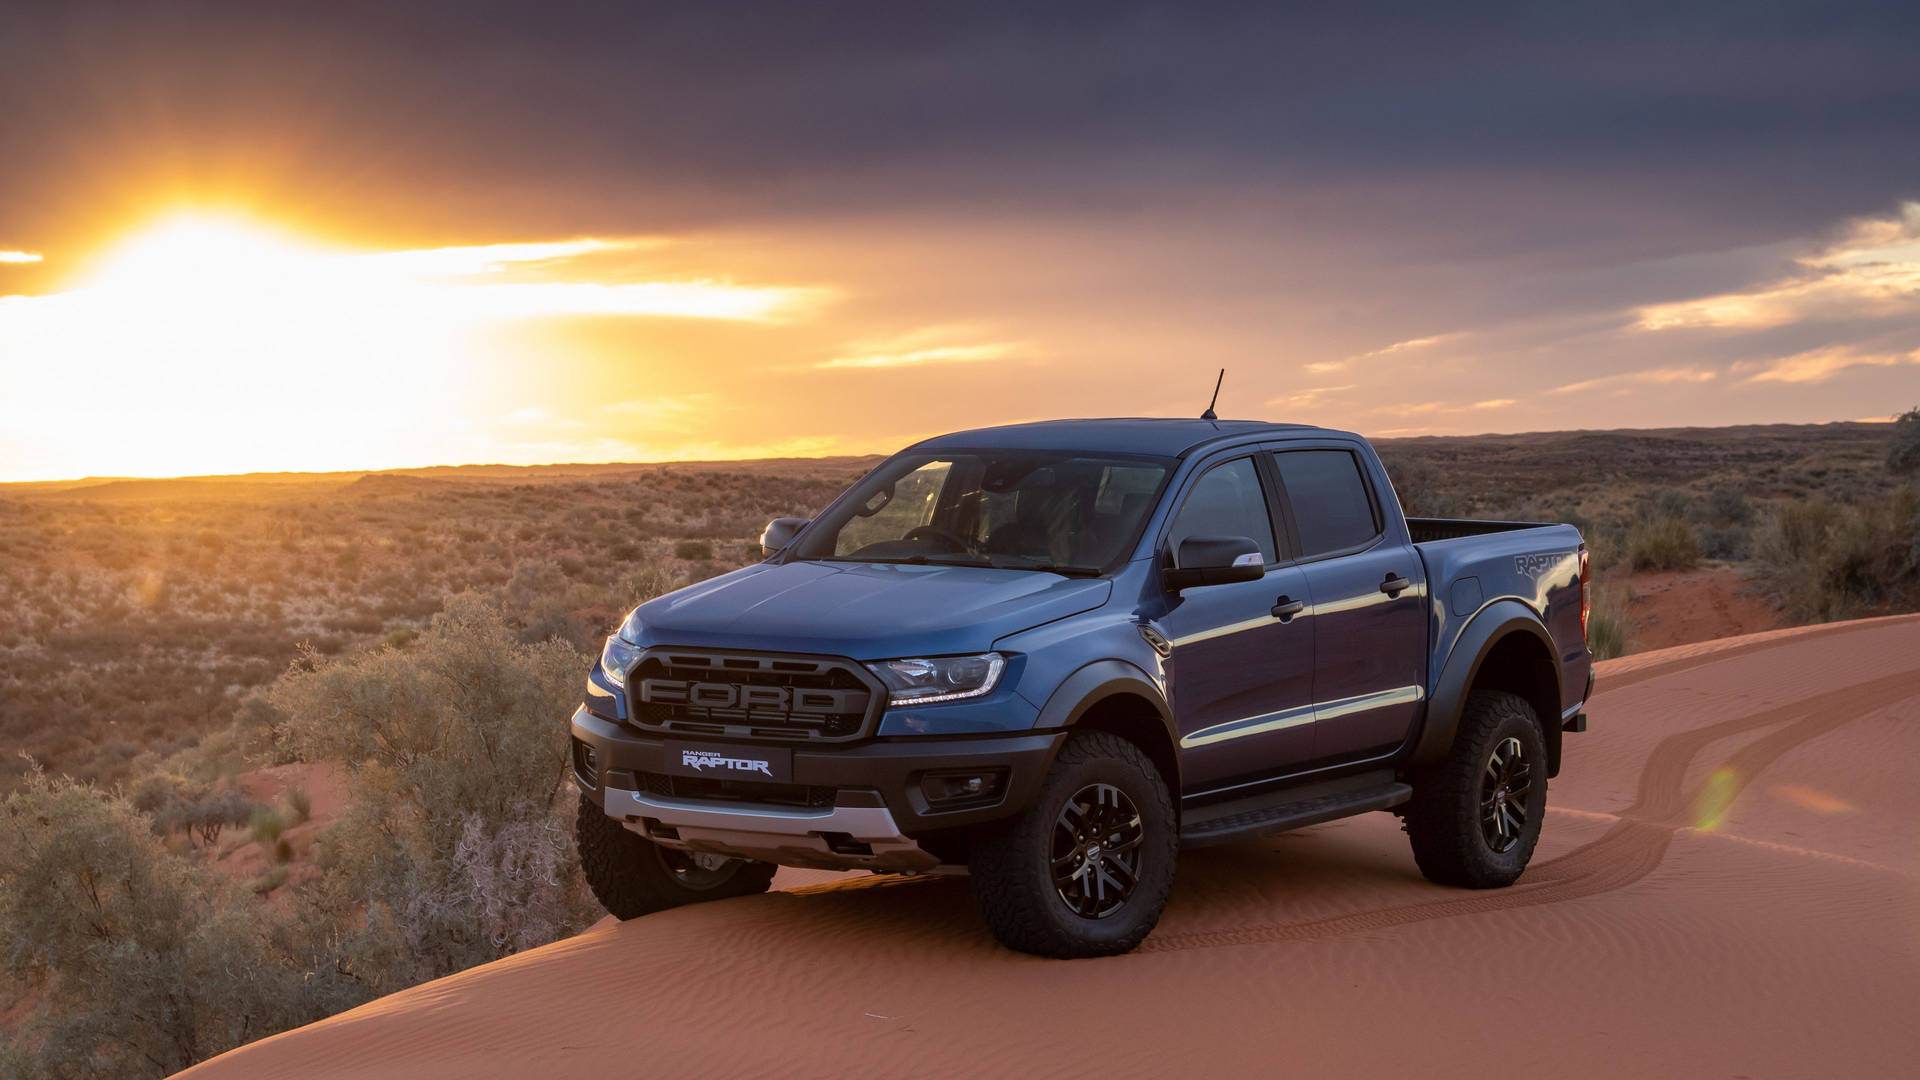 Ford Raptor With Sunset View Picture